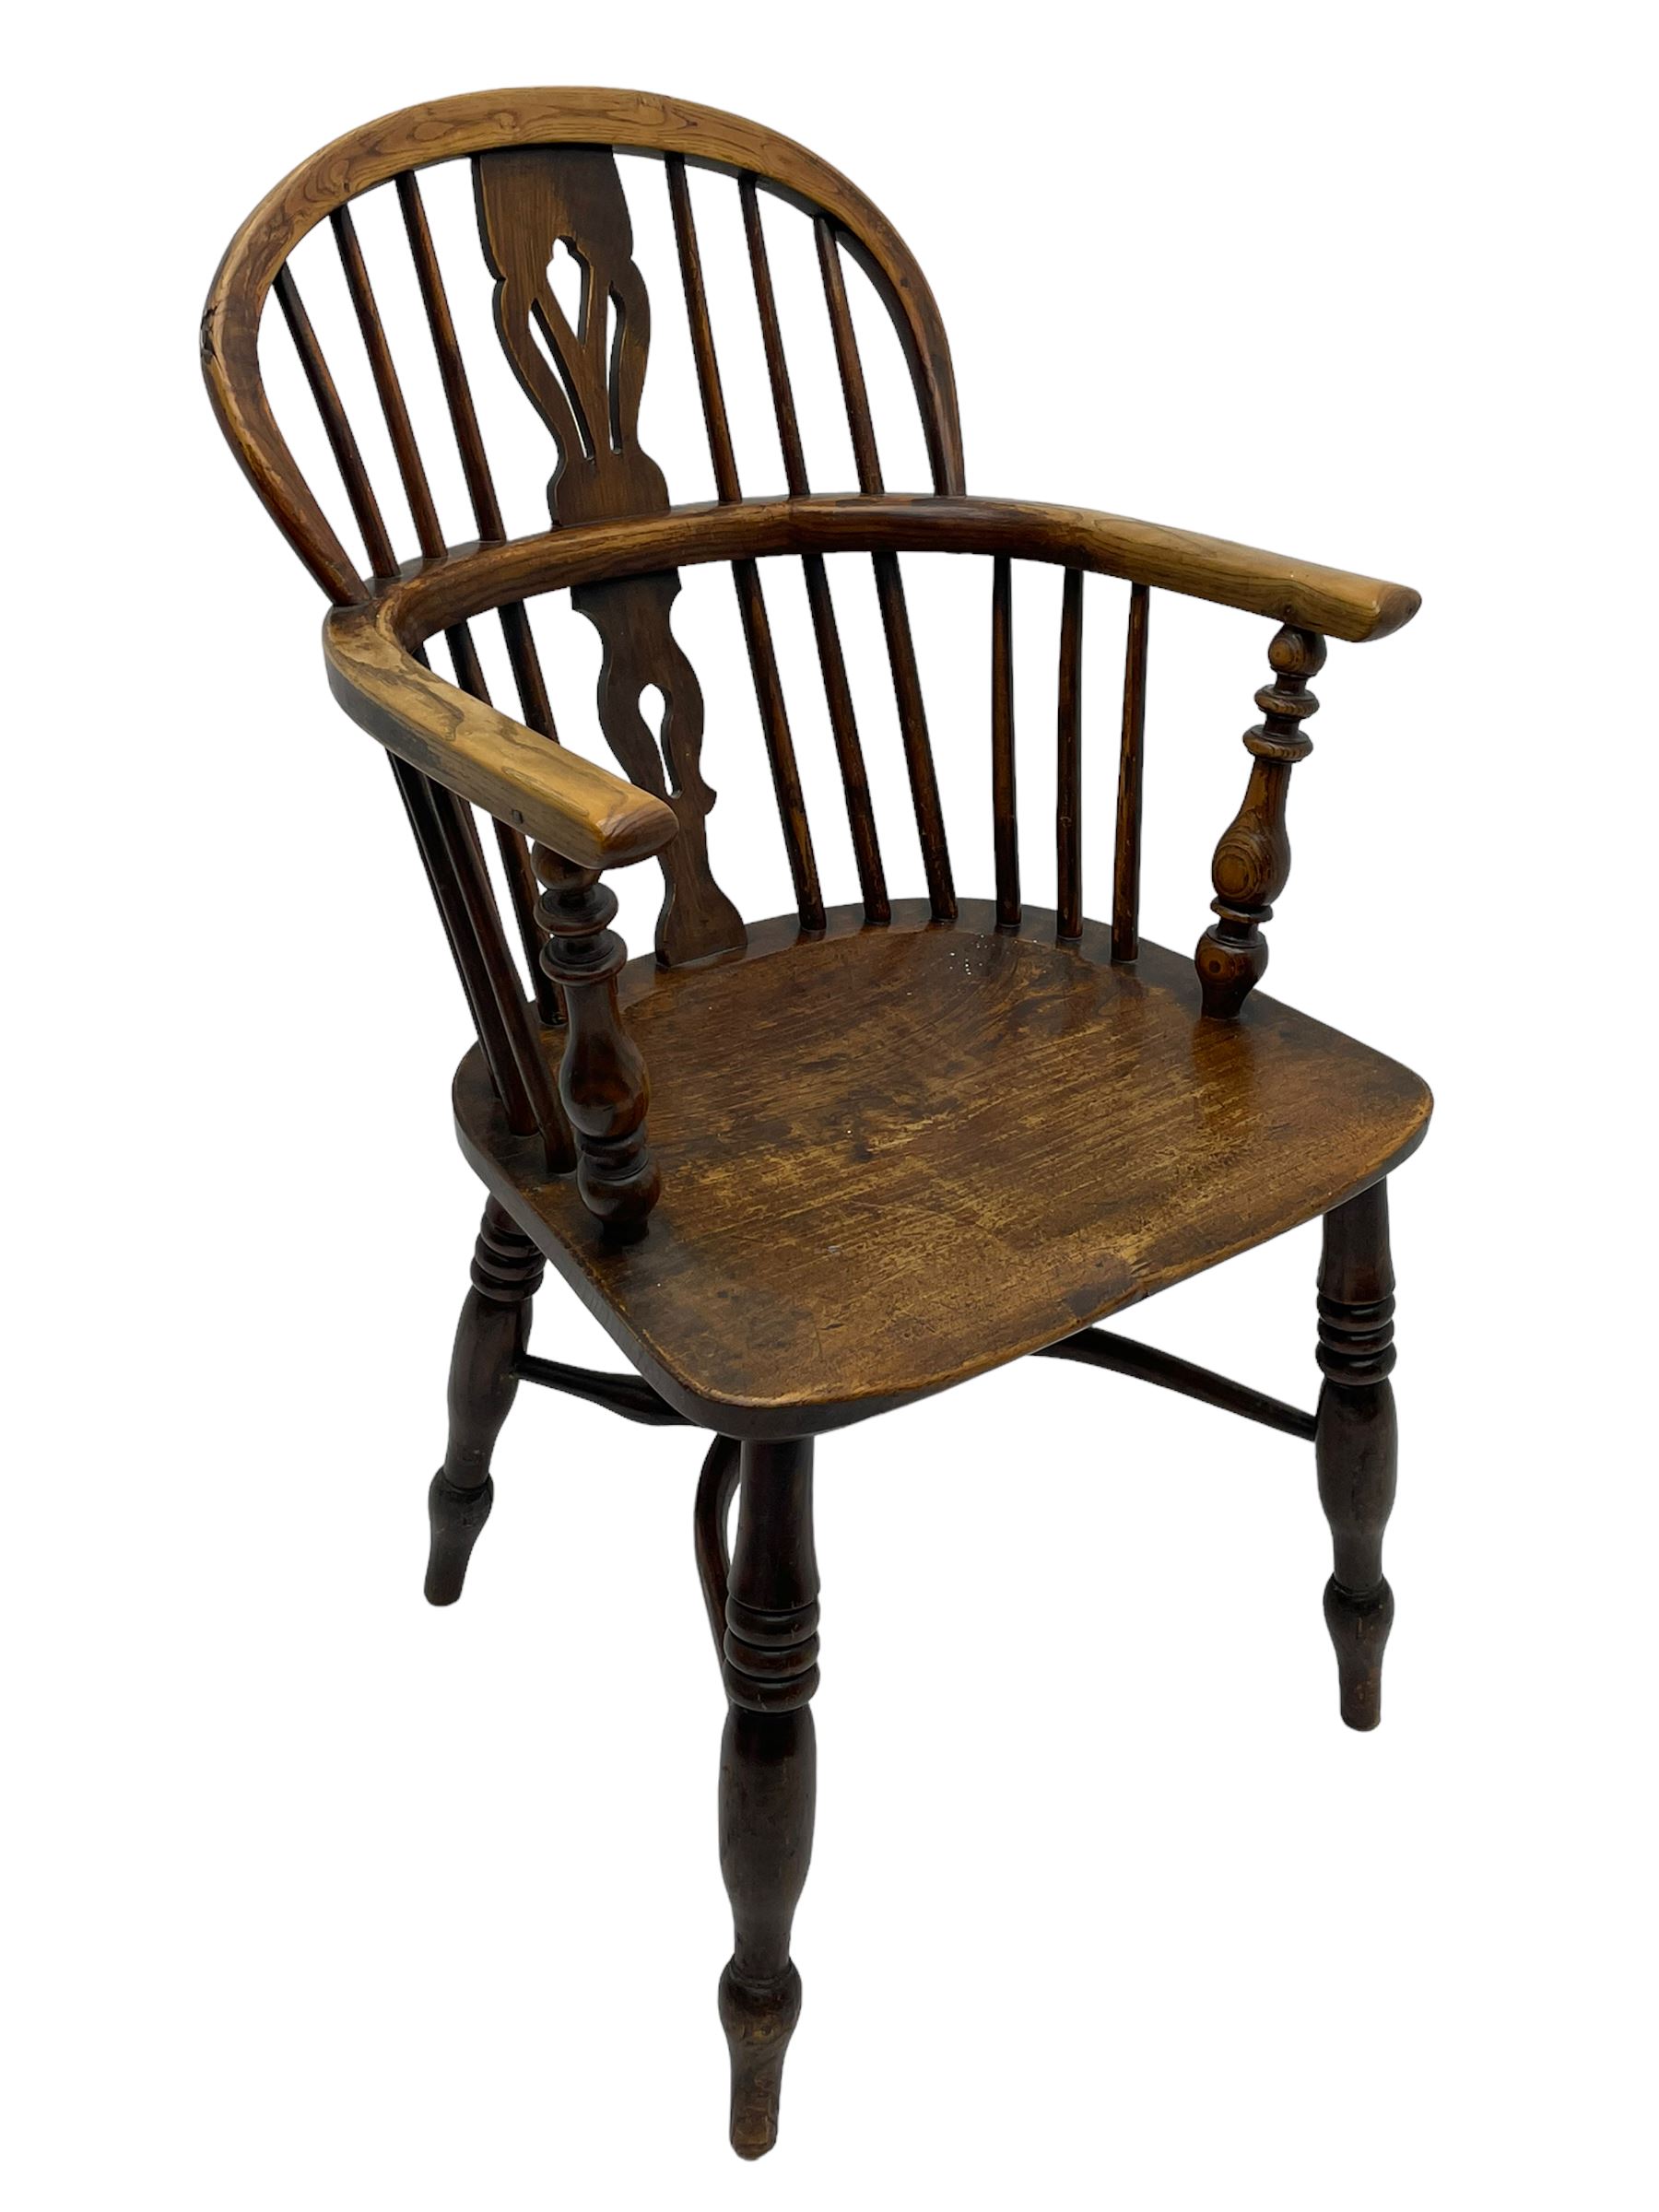 19th century elm and ash Windsor armchair - Image 5 of 6